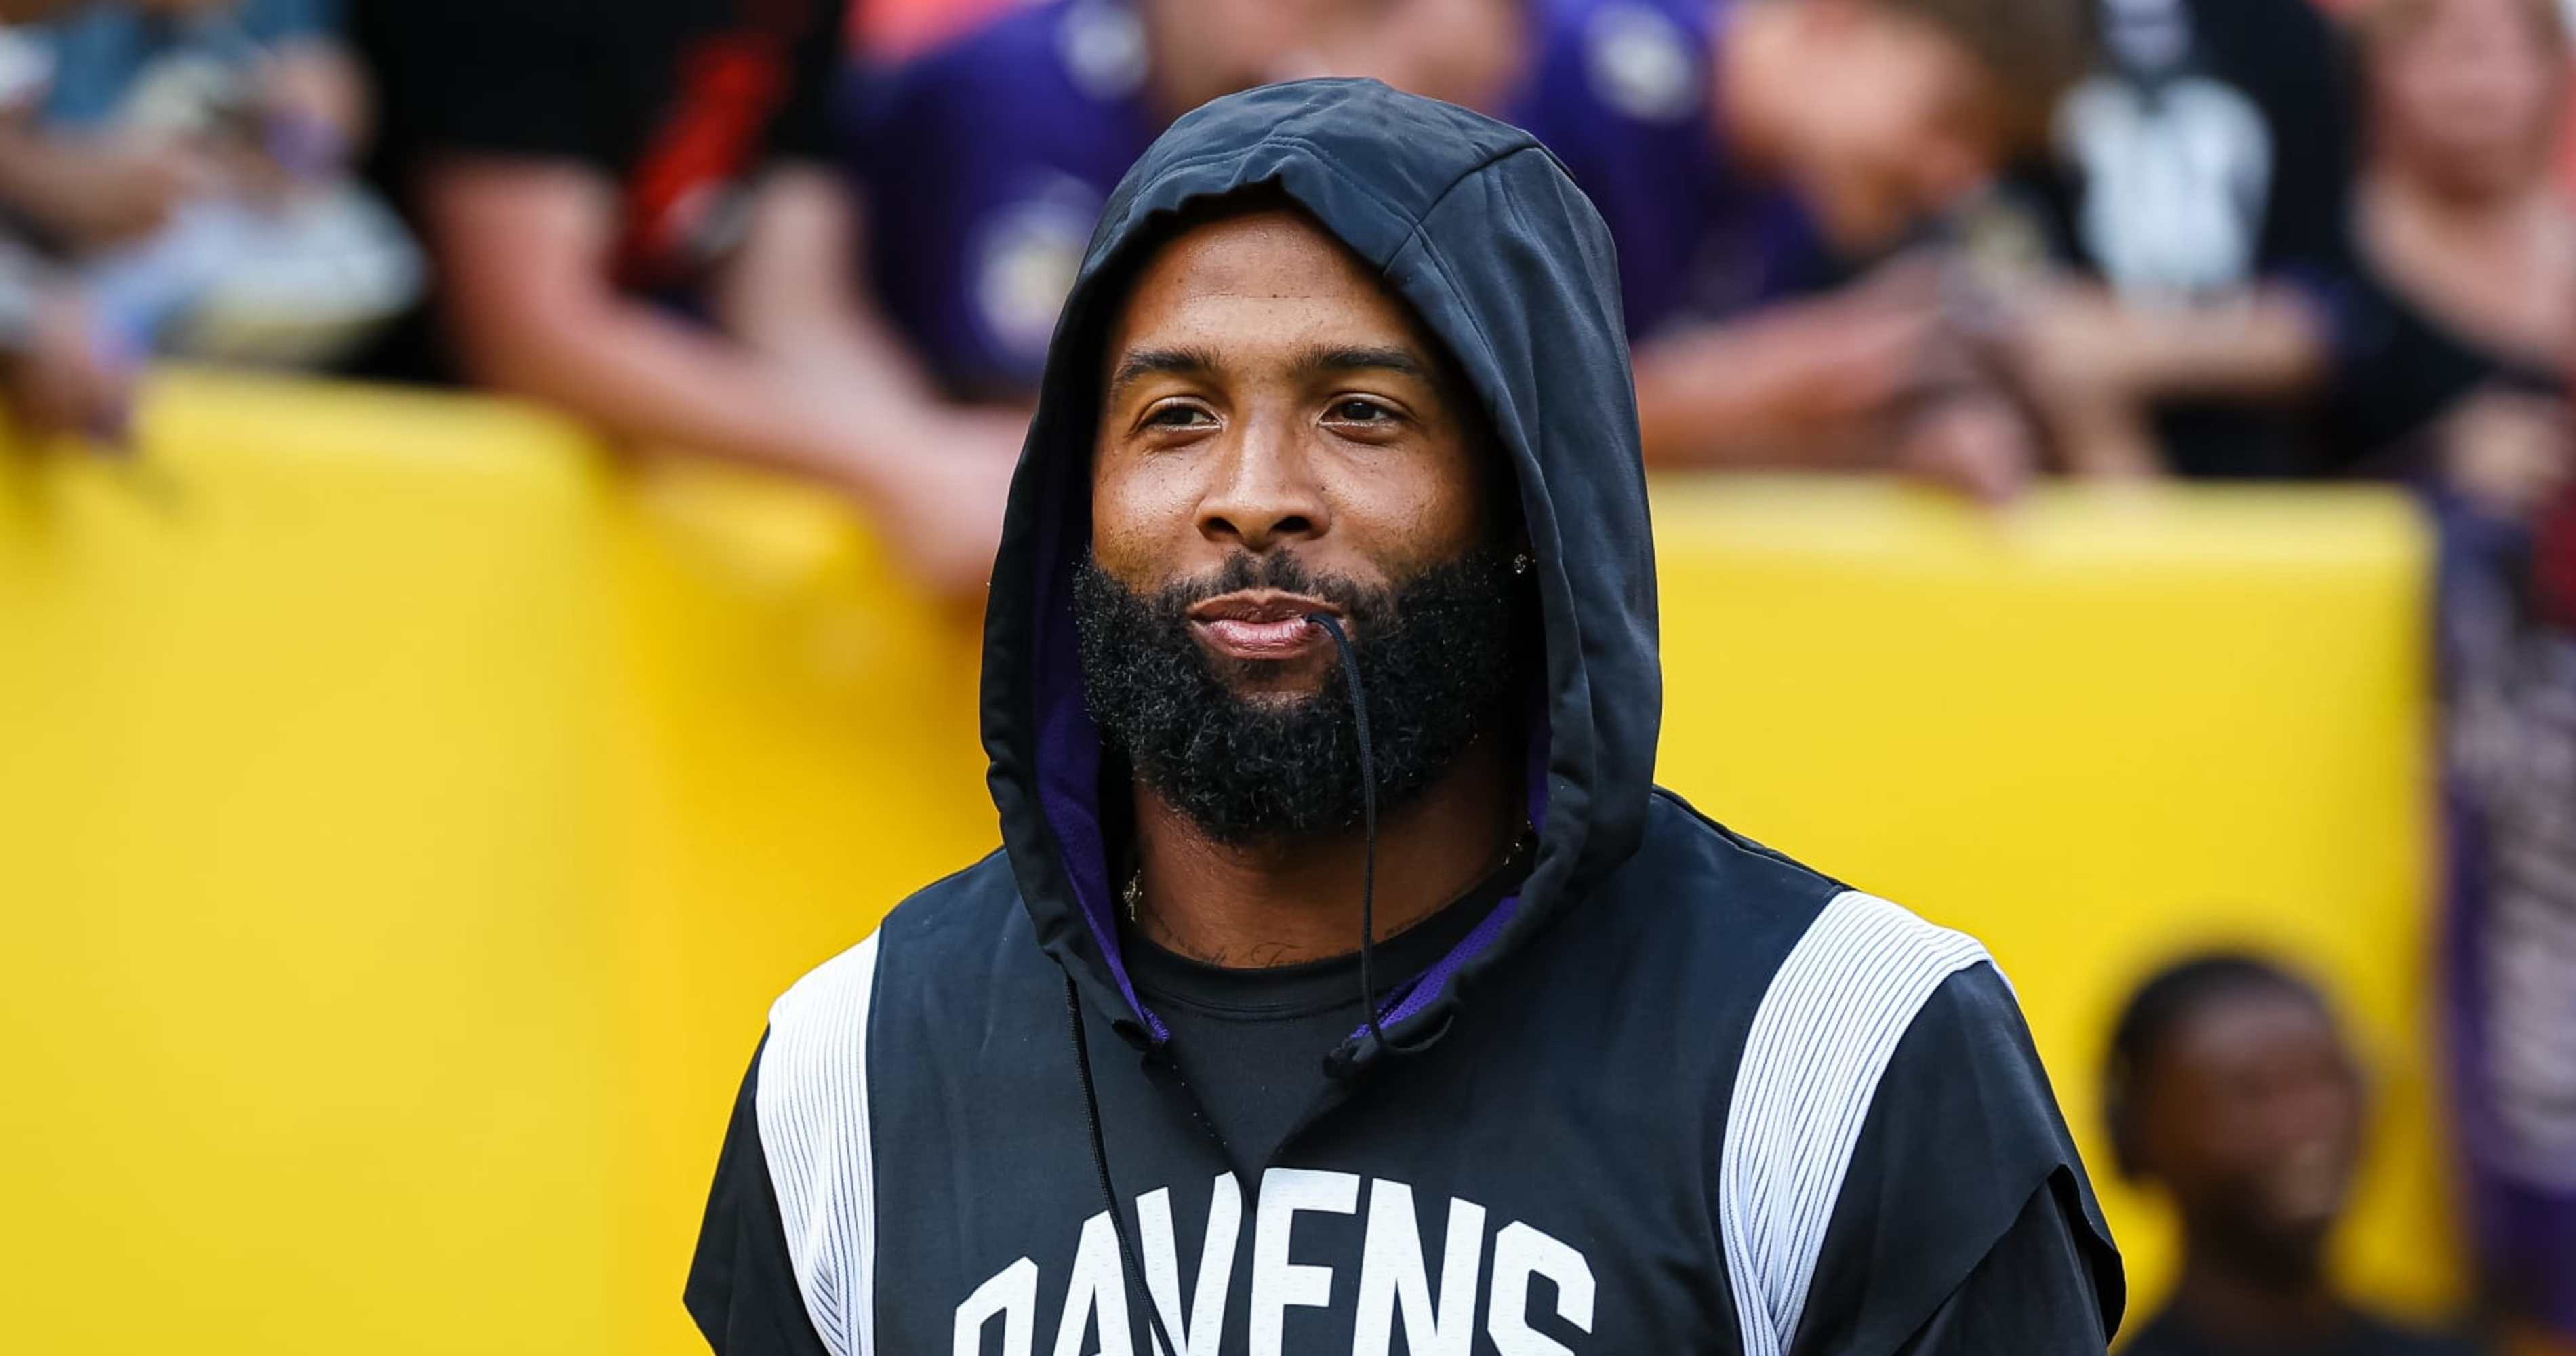 Ravens' Odell Beckham Jr. (ankle) added to injury report as